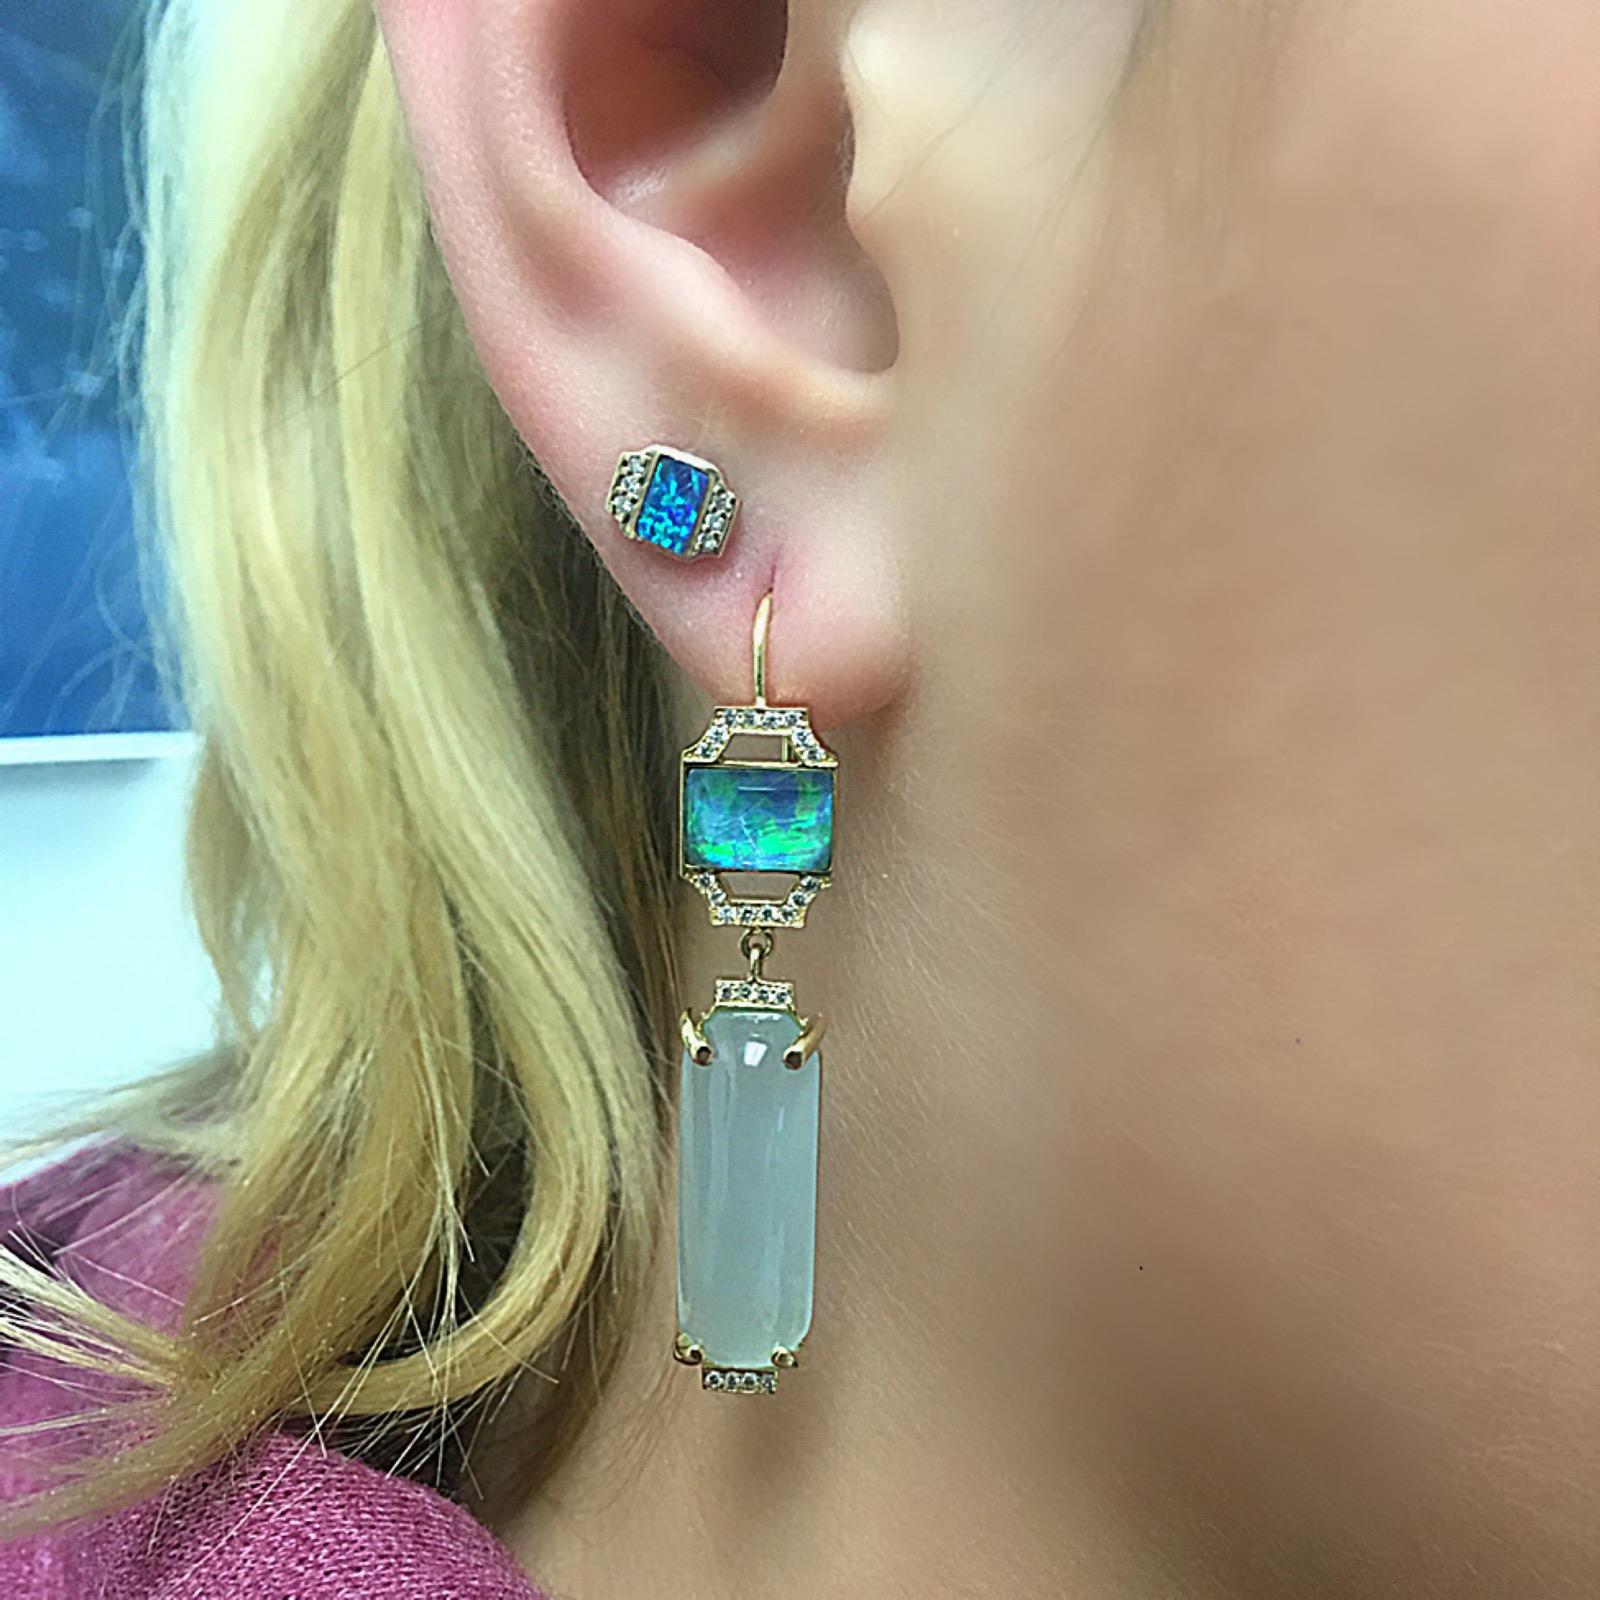 An Art Deco influence can be seen in the geometric, elongated shapes of this design. These are earrings to wear to make a bold statement with both color and shape. They feature a mix of striking color in the Boulder Opal mixed with a custom cut